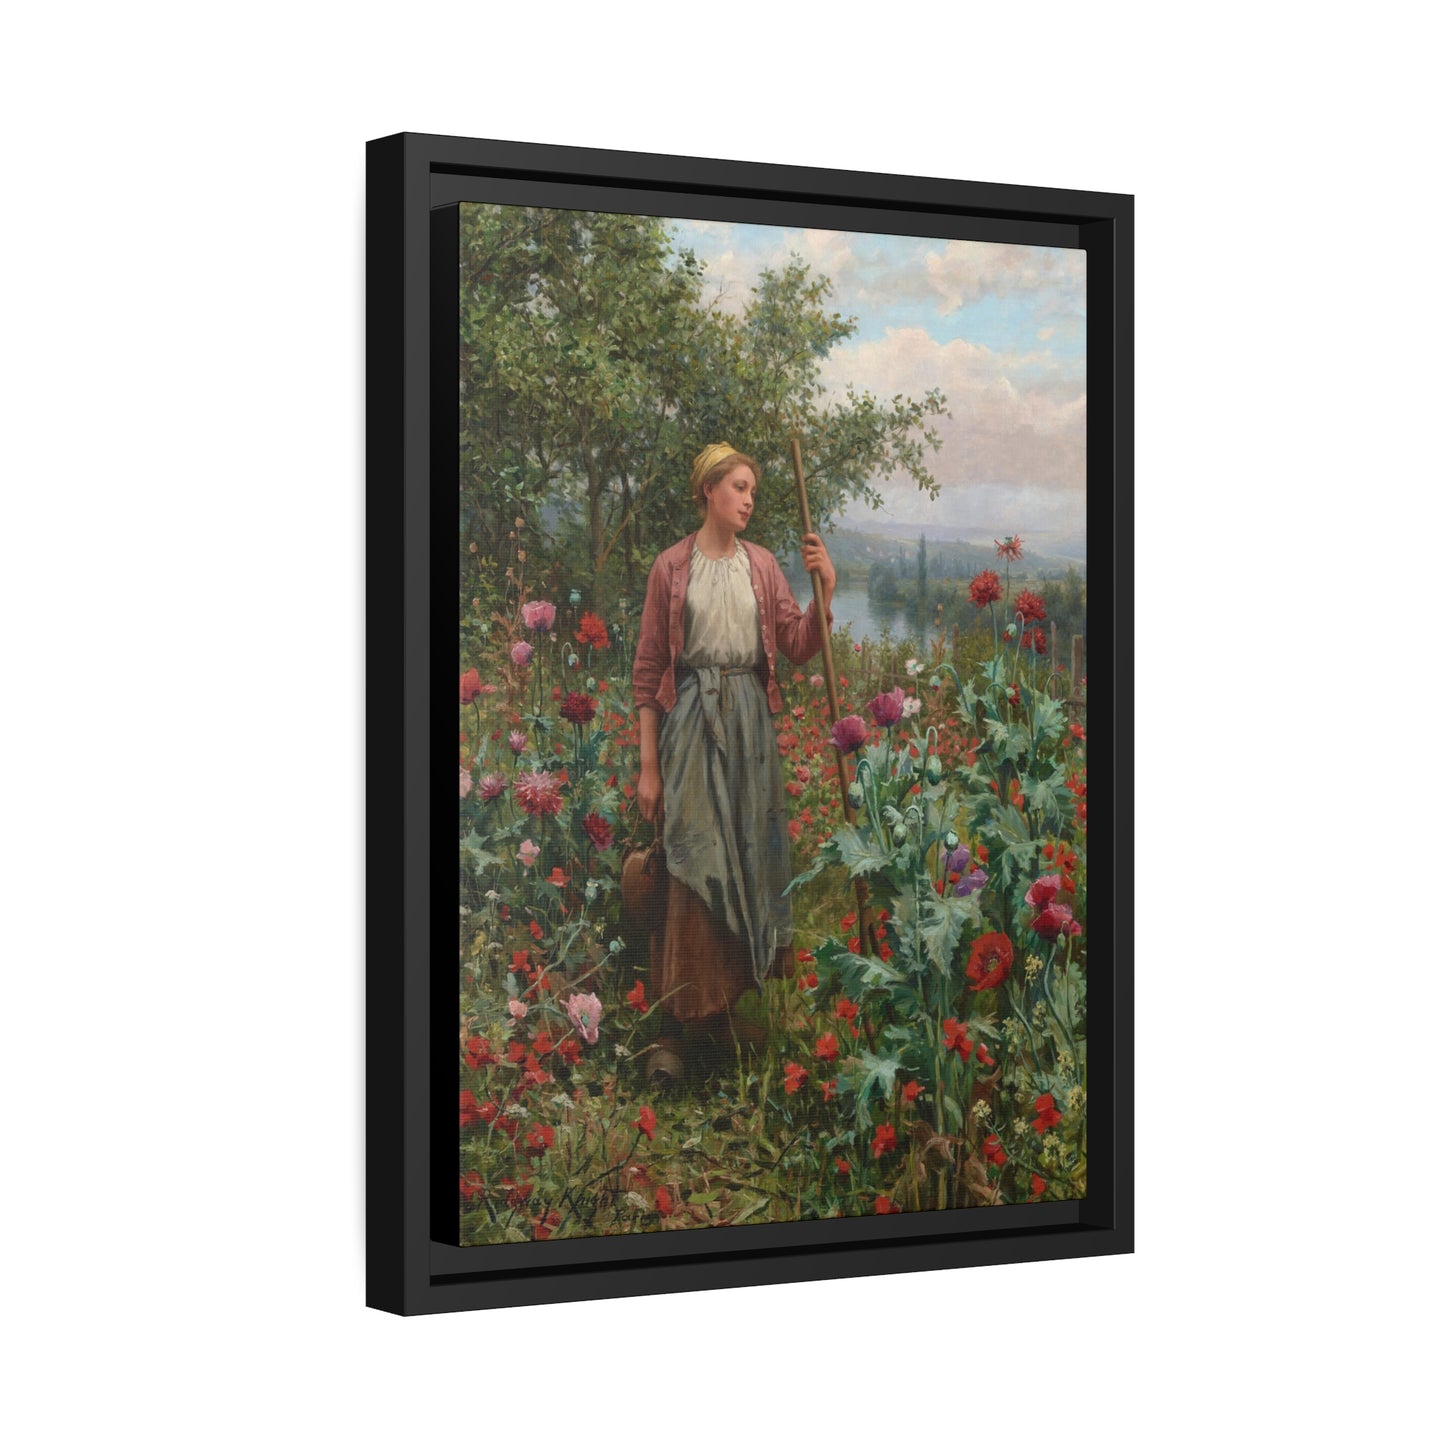 Daniel Ridgway Knight: "Maria Among the Poppies" - Framed Canvas Reproduction